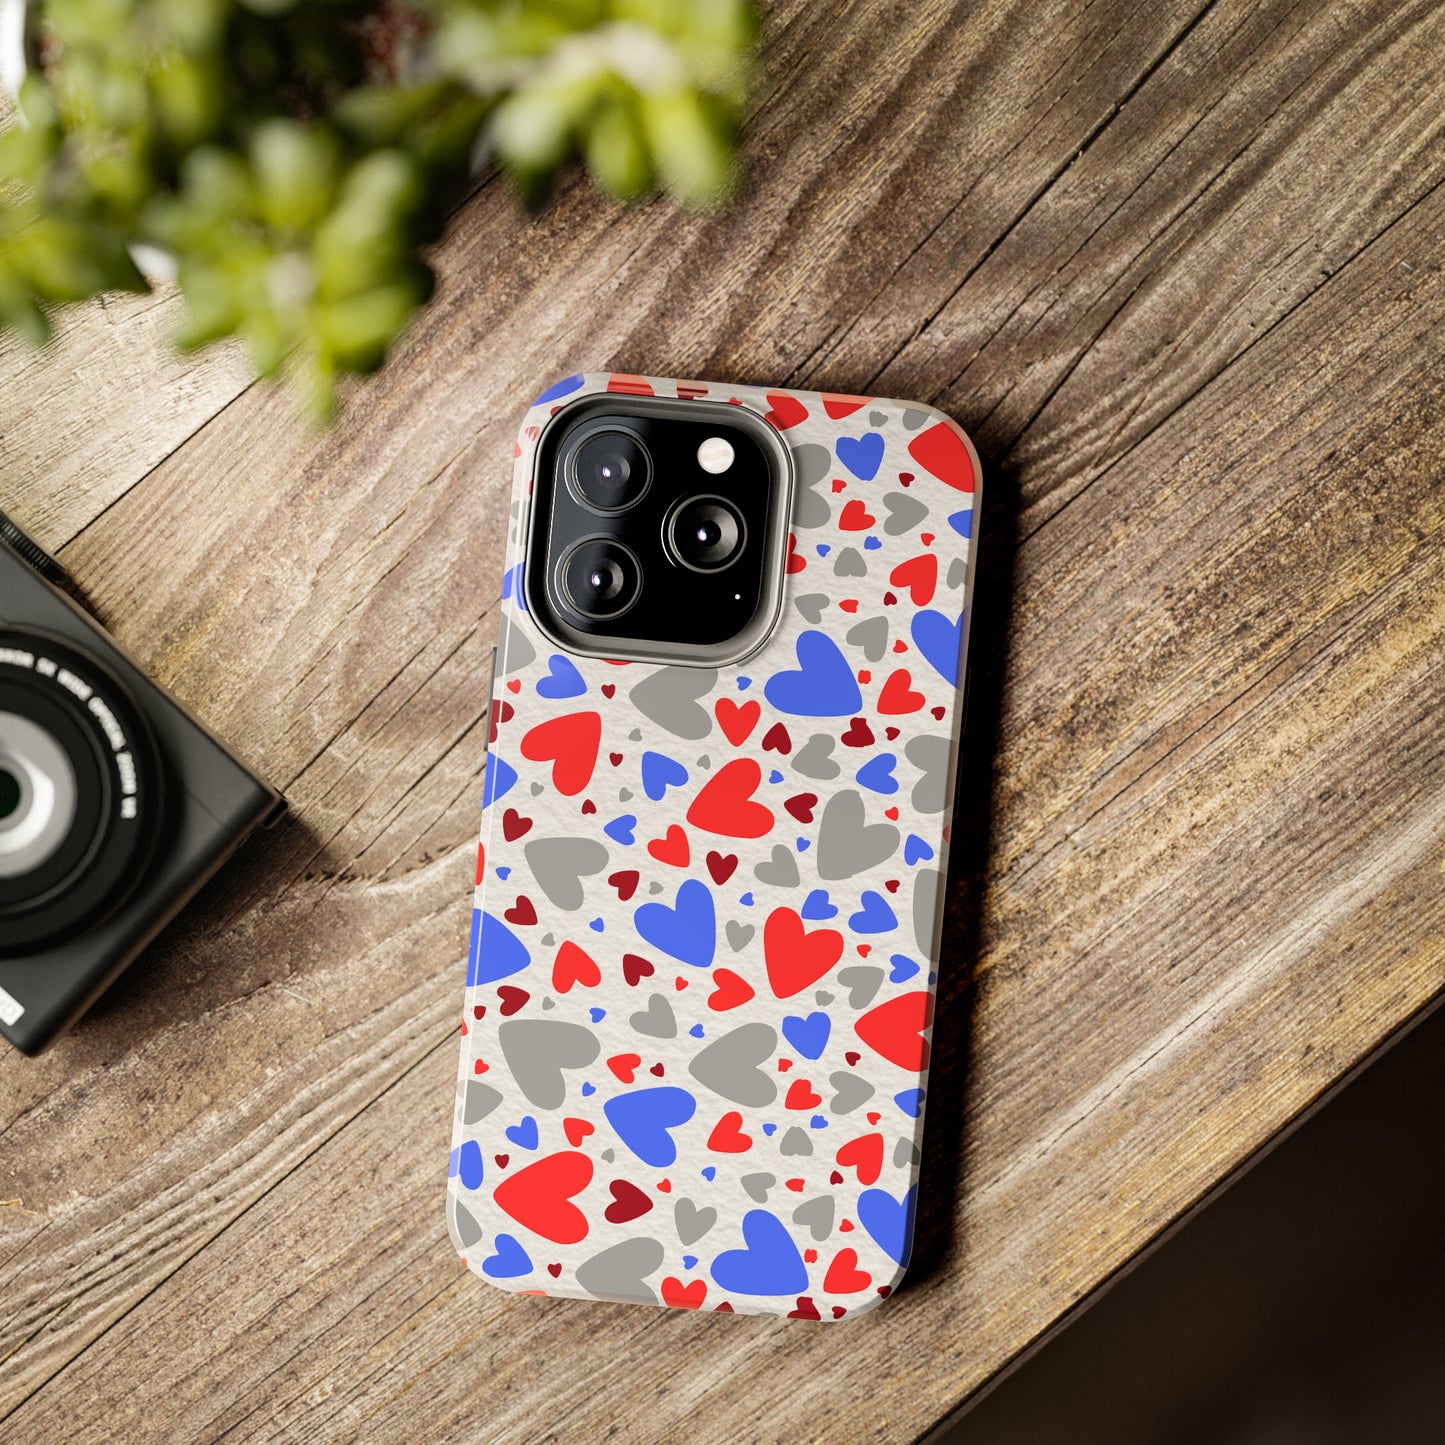 Full of Hearts -Tough Phone Cases